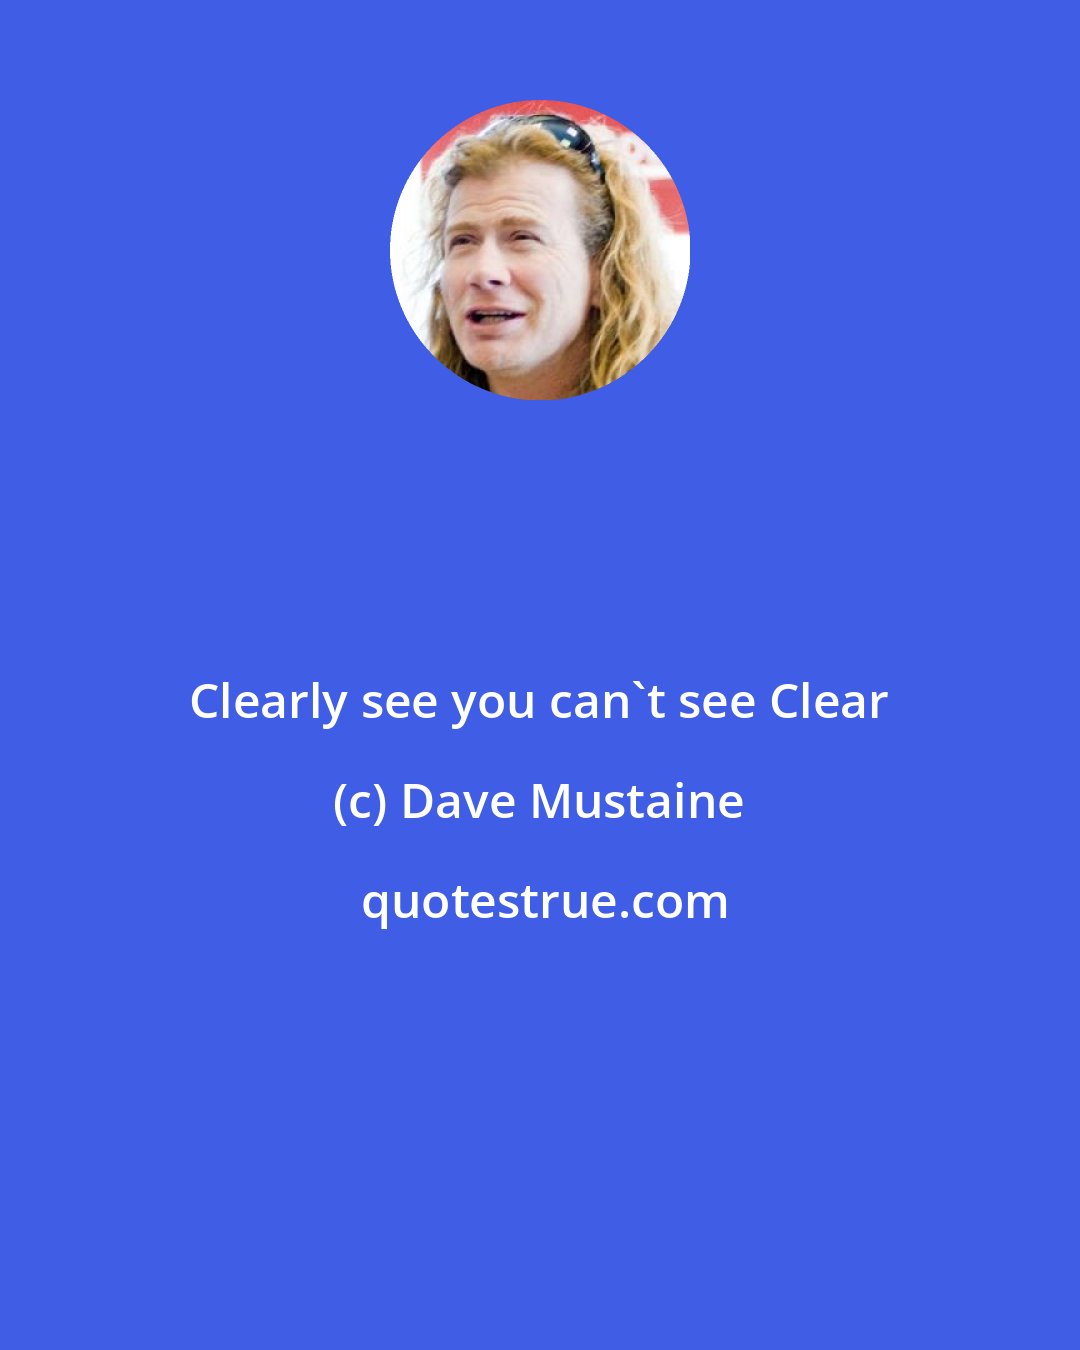 Dave Mustaine: Clearly see you can't see Clear